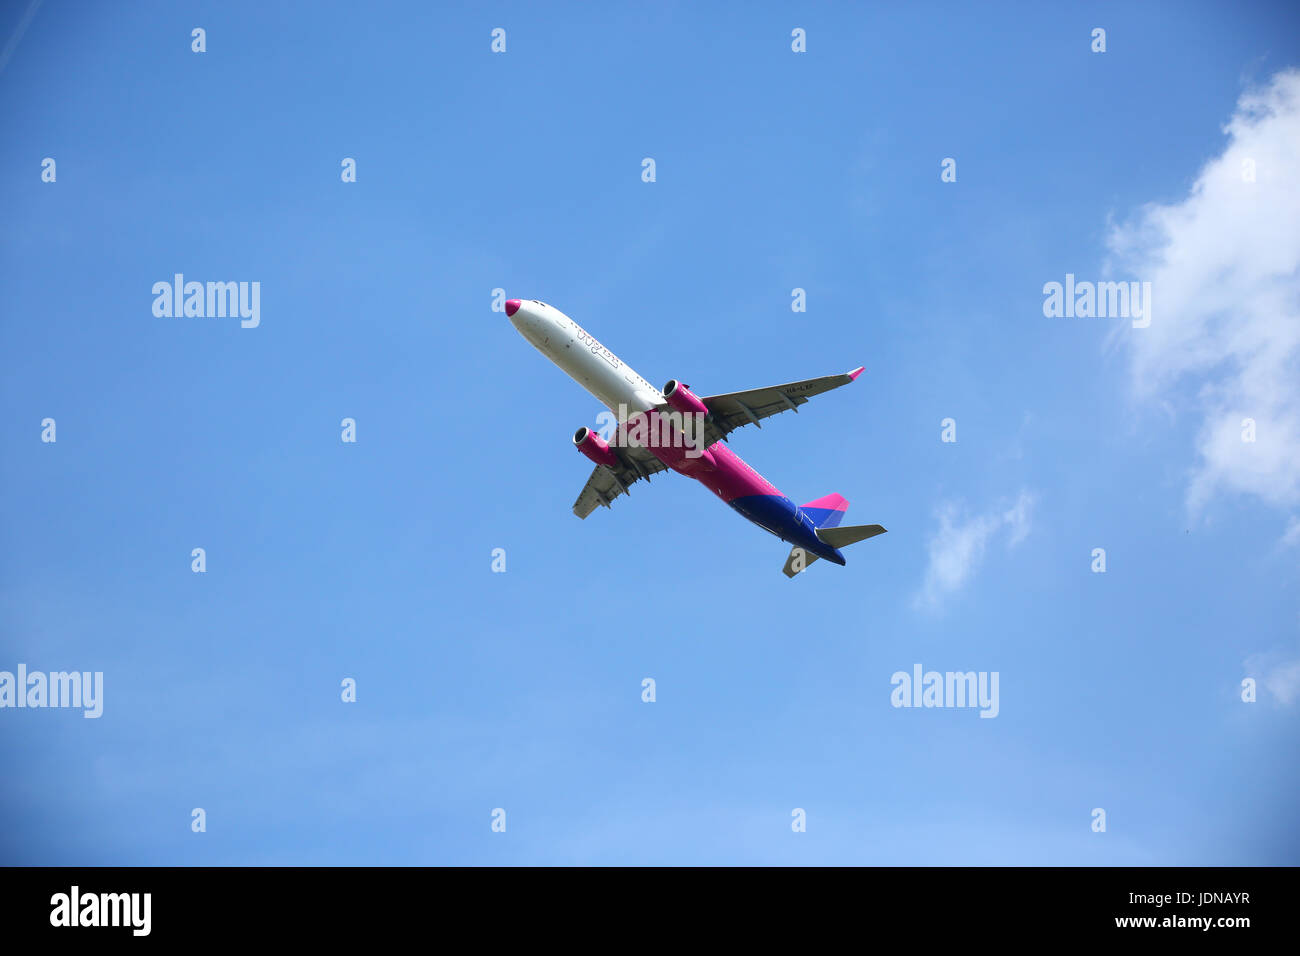 WIZZ airlines plane takeoff Stock Photo